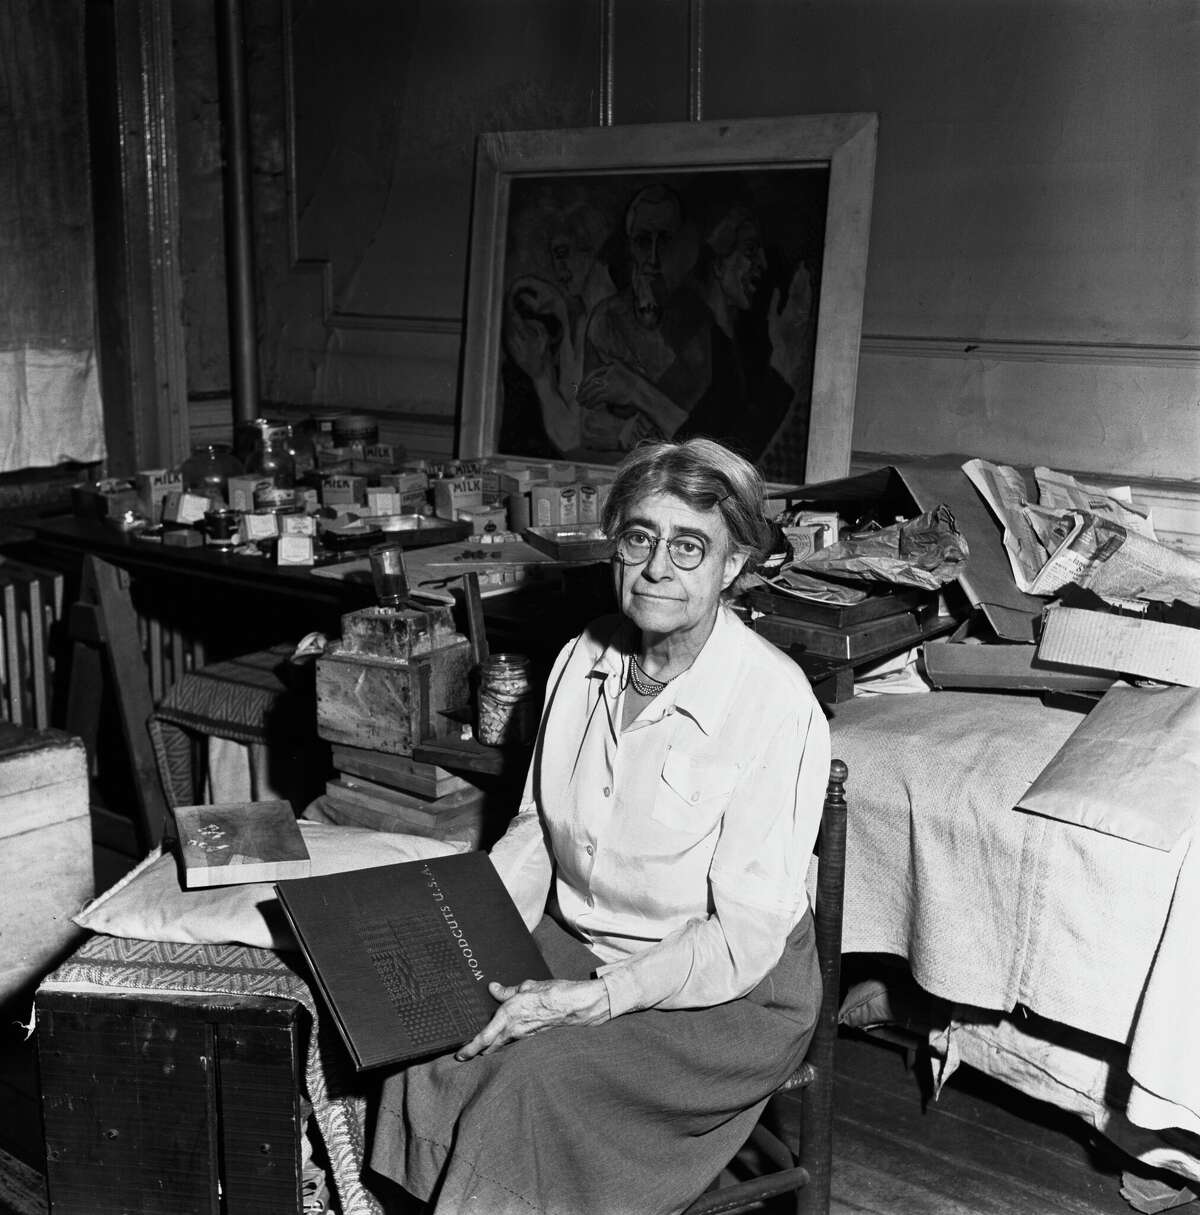 American painter and woodcut artist Helen West Heller with the book "Woodcuts USA," a collection of her works.